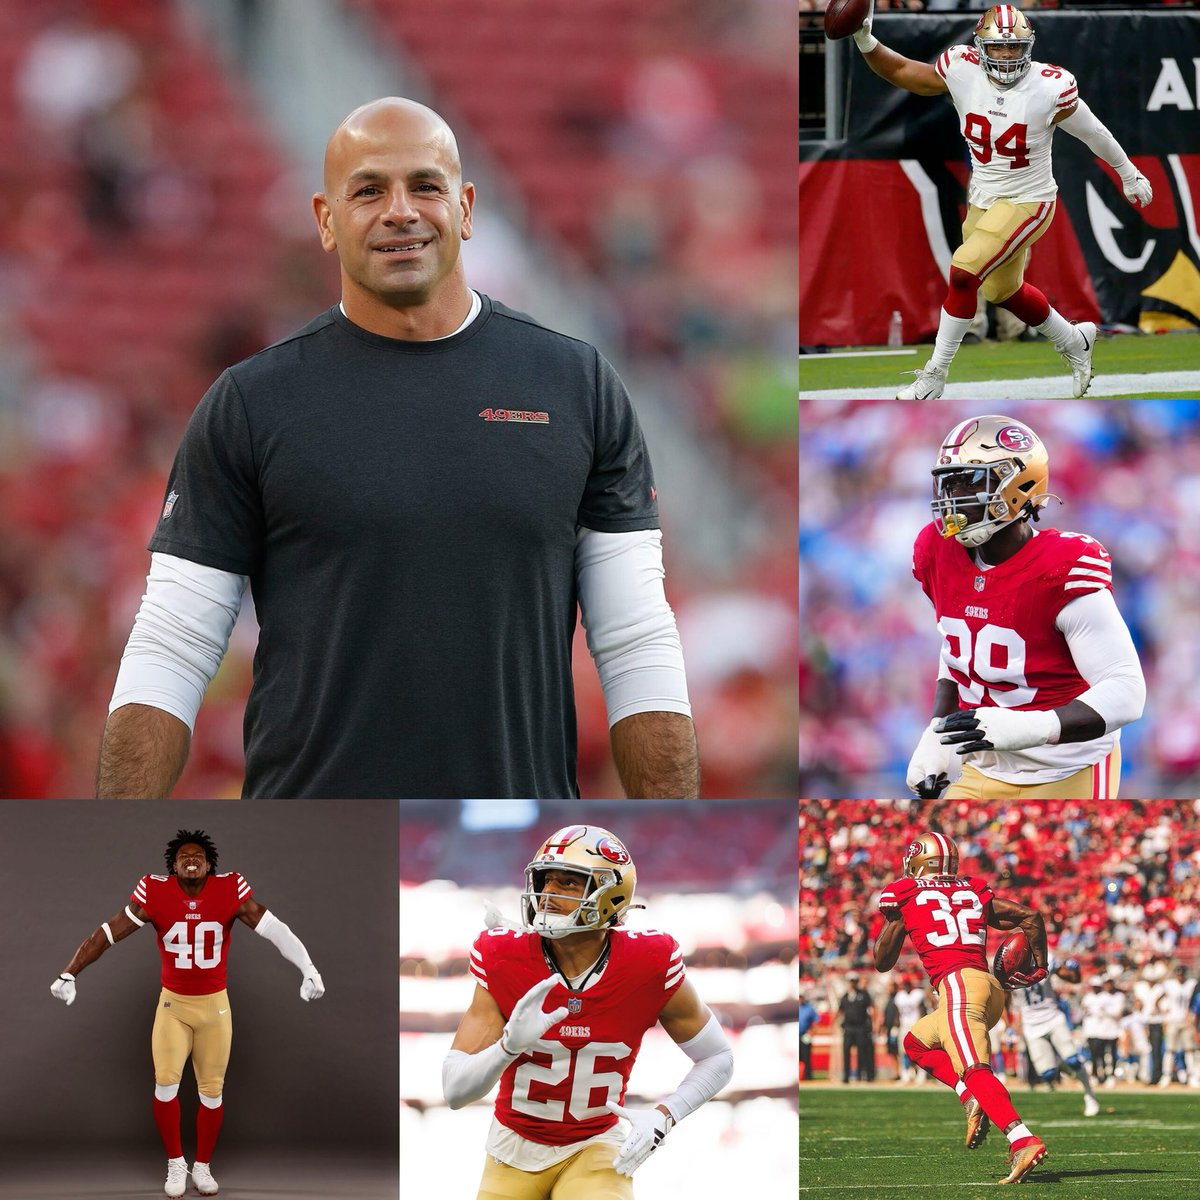 The 49ers will reunite with some familiar faces in the week 1 home opener vs the Jets 👀